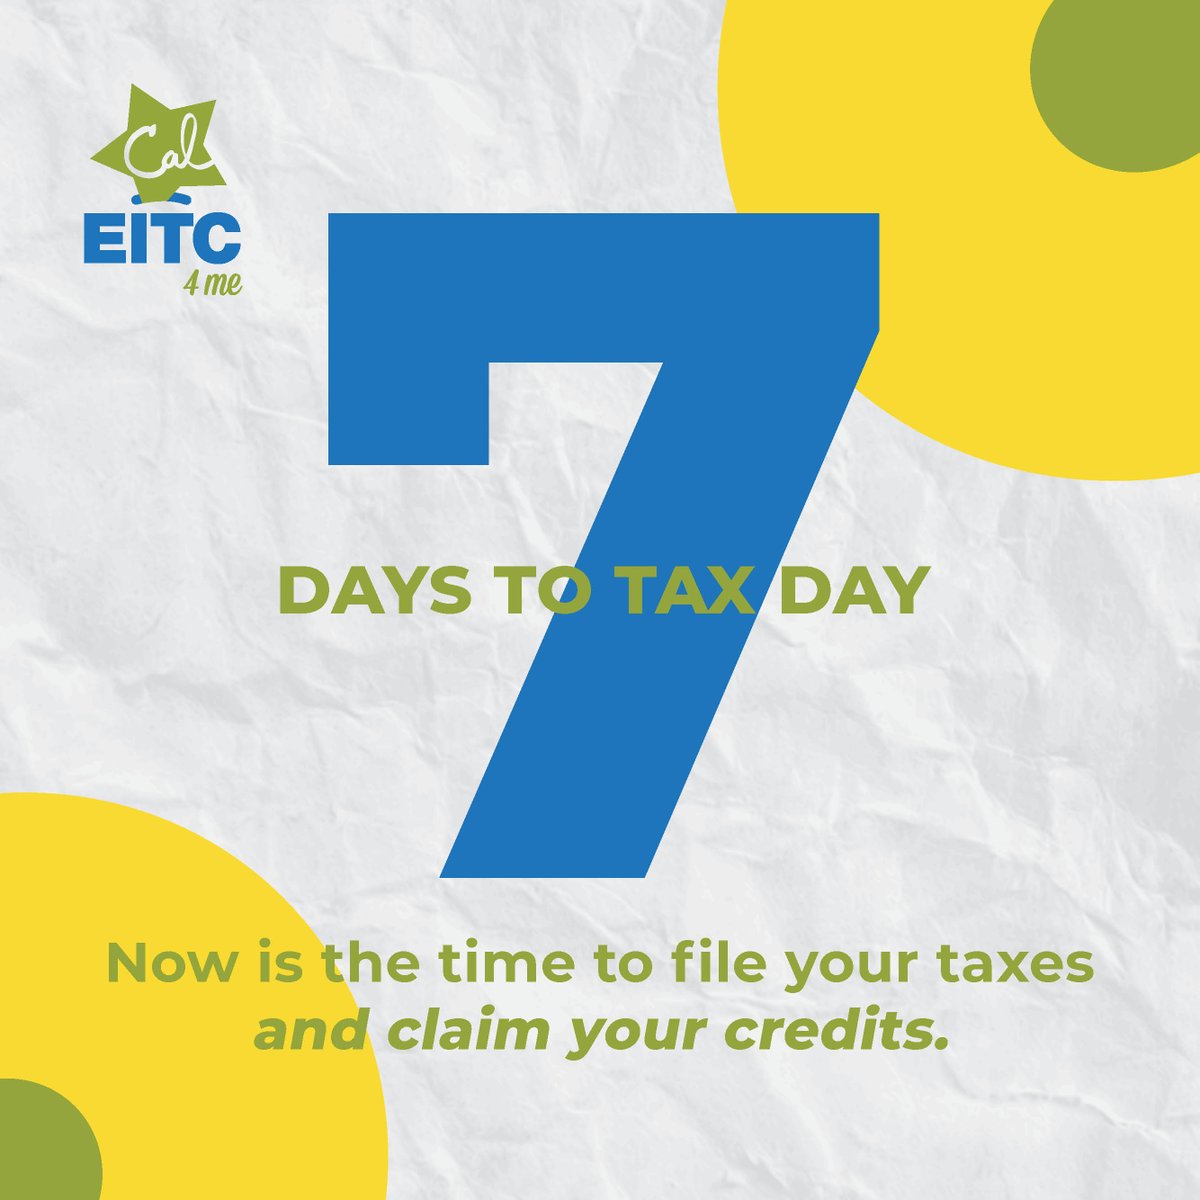 There's a week left until tax day on April 15, but you still have time to file and claim your tax credits! Visit caleitc.org for information on the credits you can claim and free tax filing options.